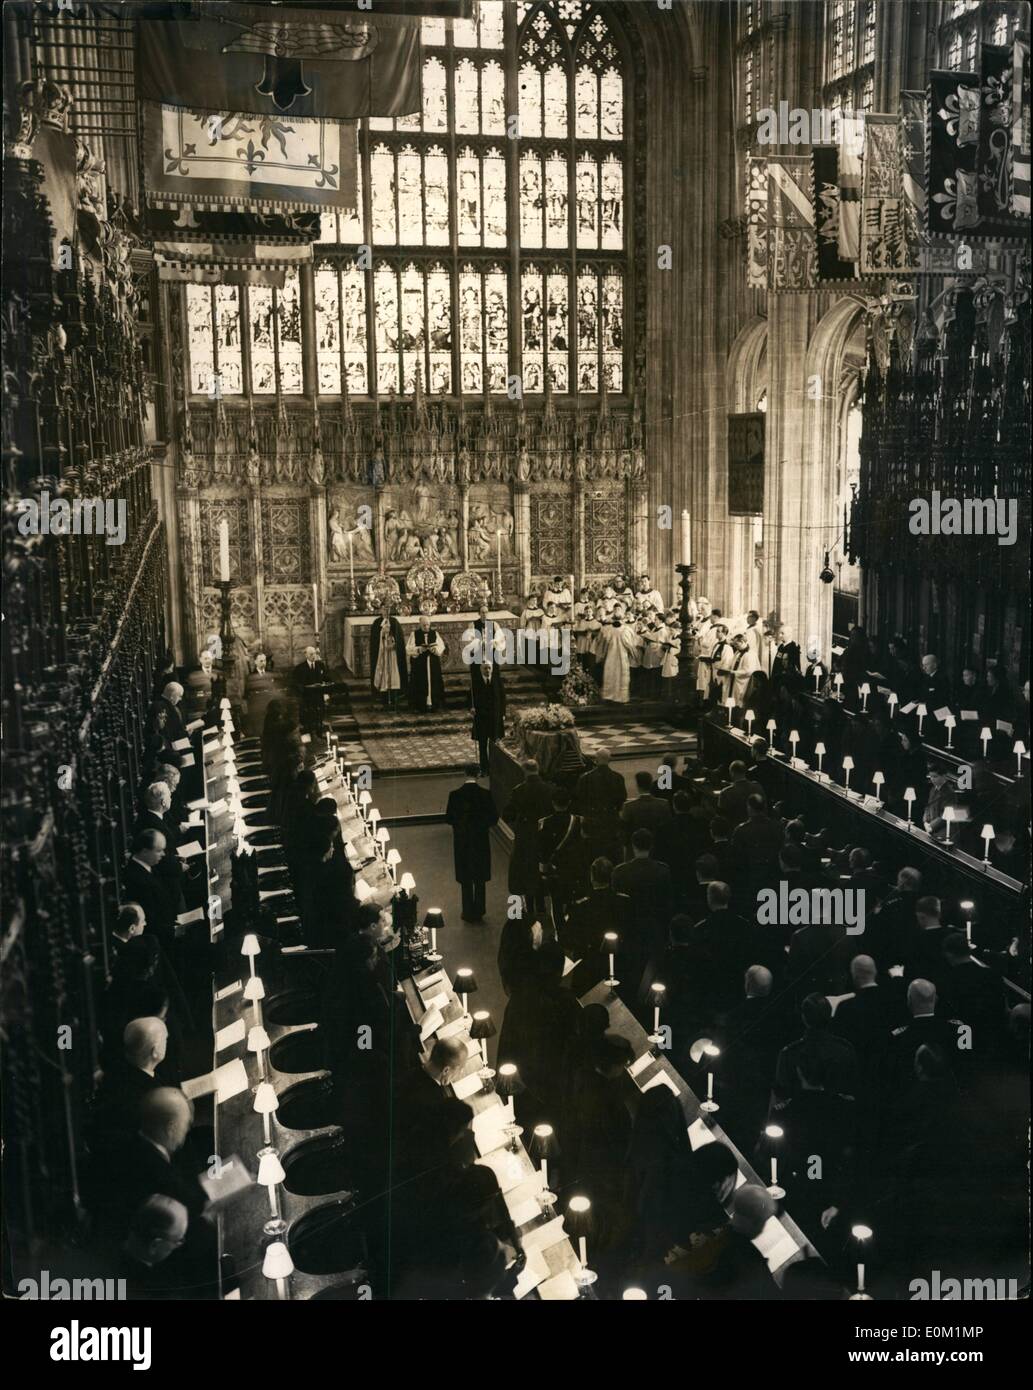 Mar. 03, 1953 - Queen Mary: The Final Scene: The scene, sombre and impressive, at the funeral service of Queen Mary in St. George's Chapel, Windsor today (Tuesday). Been in paw on right of picture are (left to right), The Queen Elizabeth the Queen mother and Princess Margaret. Standing before the coffin are (left to right) The Duke of Kent; The Duke of Golucerster; The Earl of Athlone, Queen Mary's brothers; and theDuke of Windsor. Before the alter the Archbishop of Canterbury, Dr. Goeffrey Fischer (center). is seen conducting the service. Stock Photo